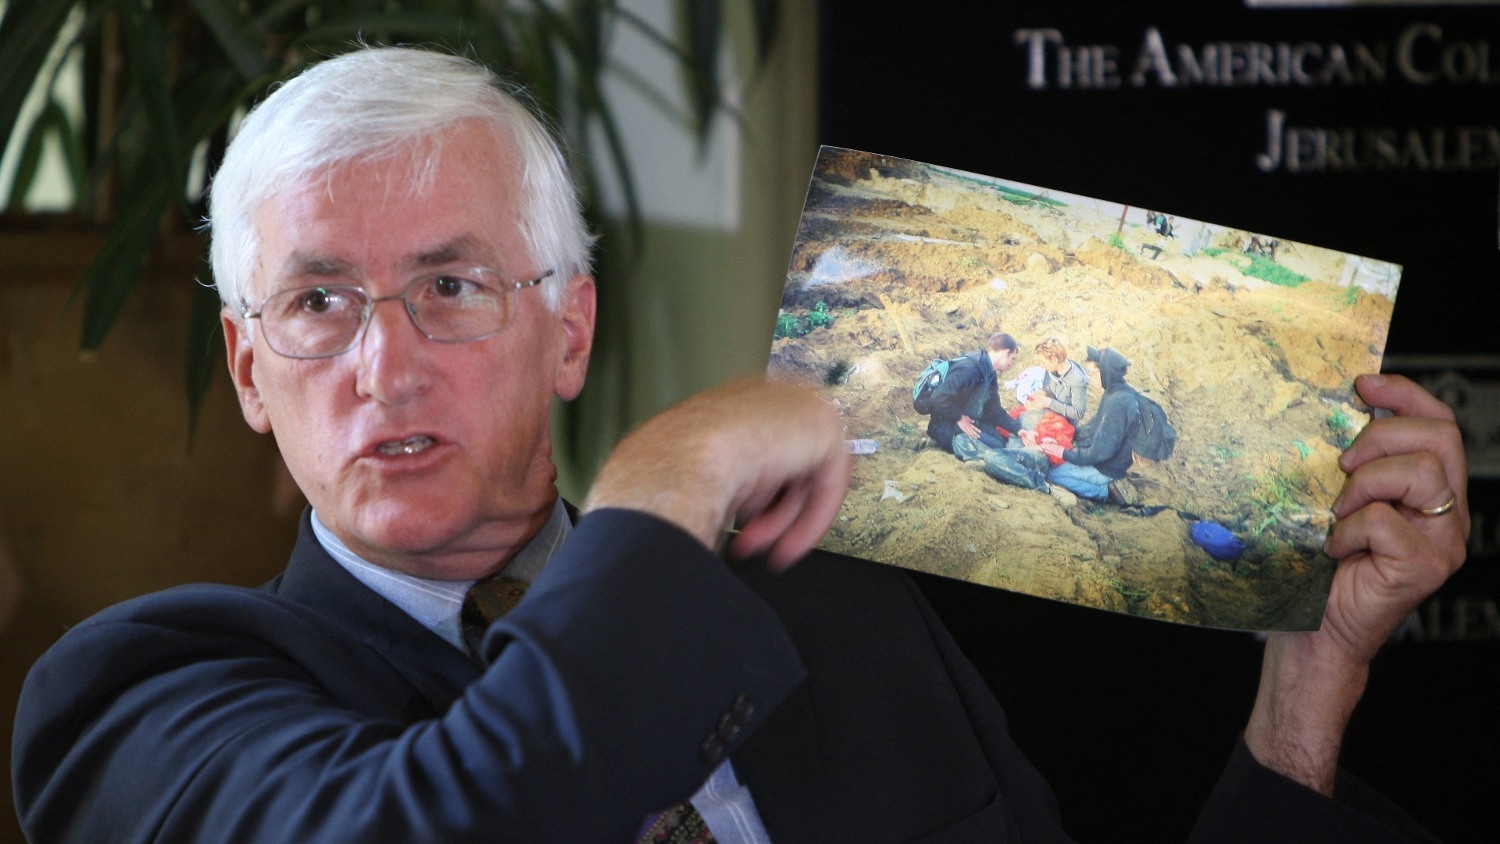 Craig Corrie, the father of US peace activist Rachel Corrie, displays a picture from the site where Rachel was killed during a press conference at an east Jerusalem hotel on 11 July 2011.